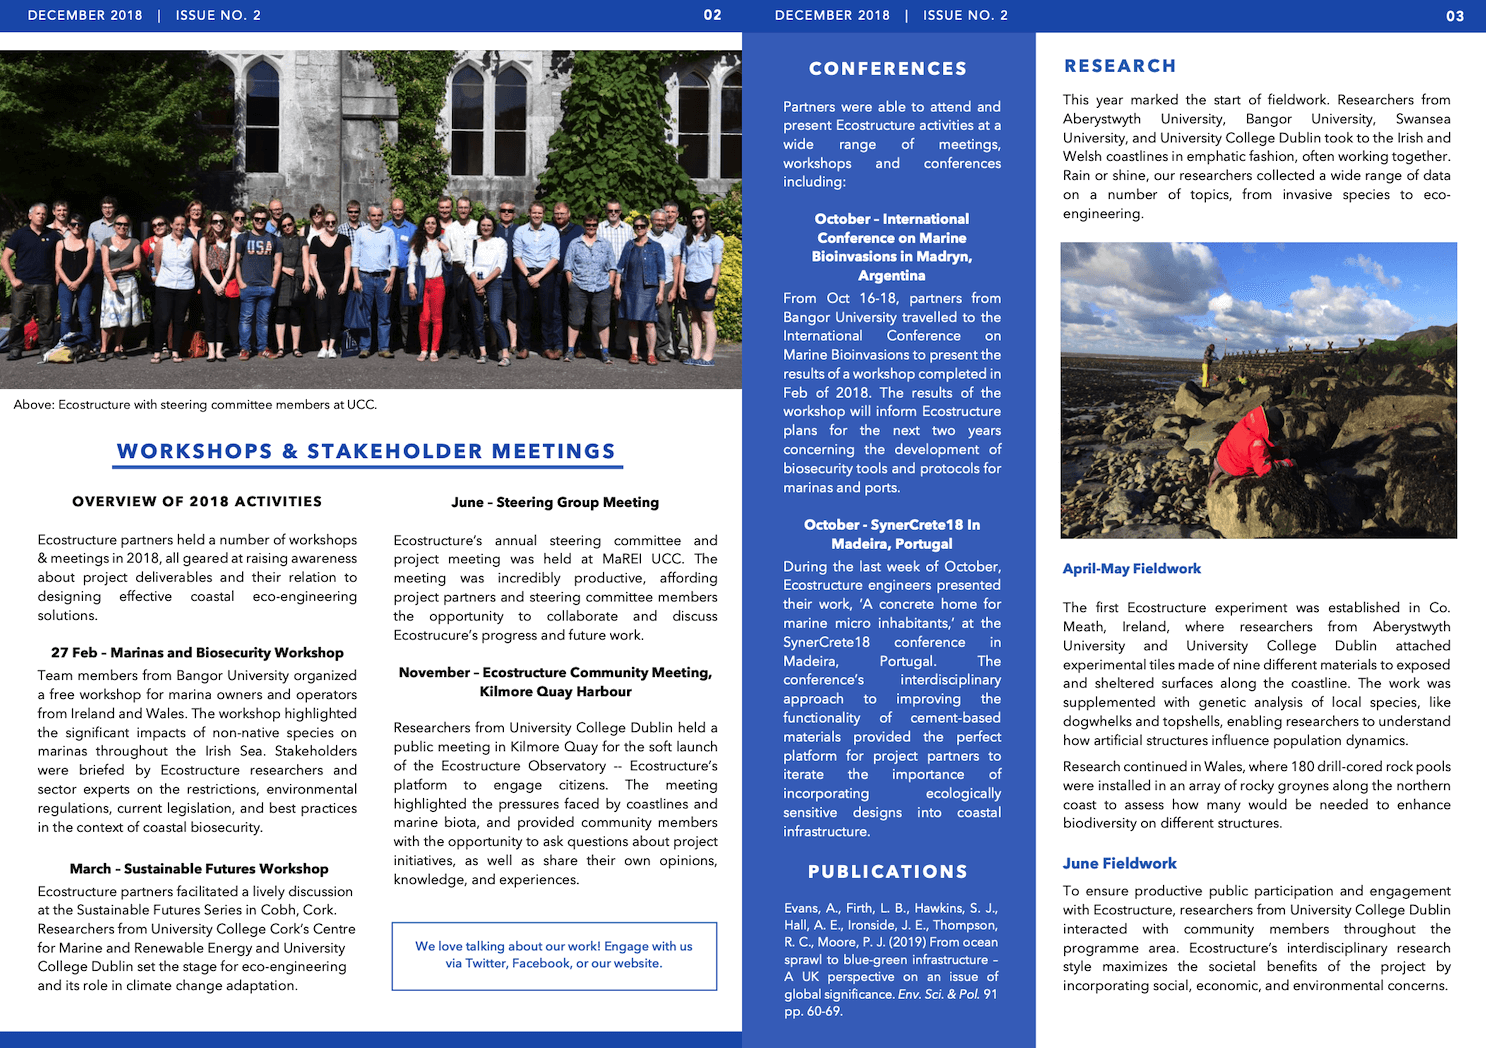 The 2018 Ecostructure project newsletter, describing eco-engineering and biosecurity research.